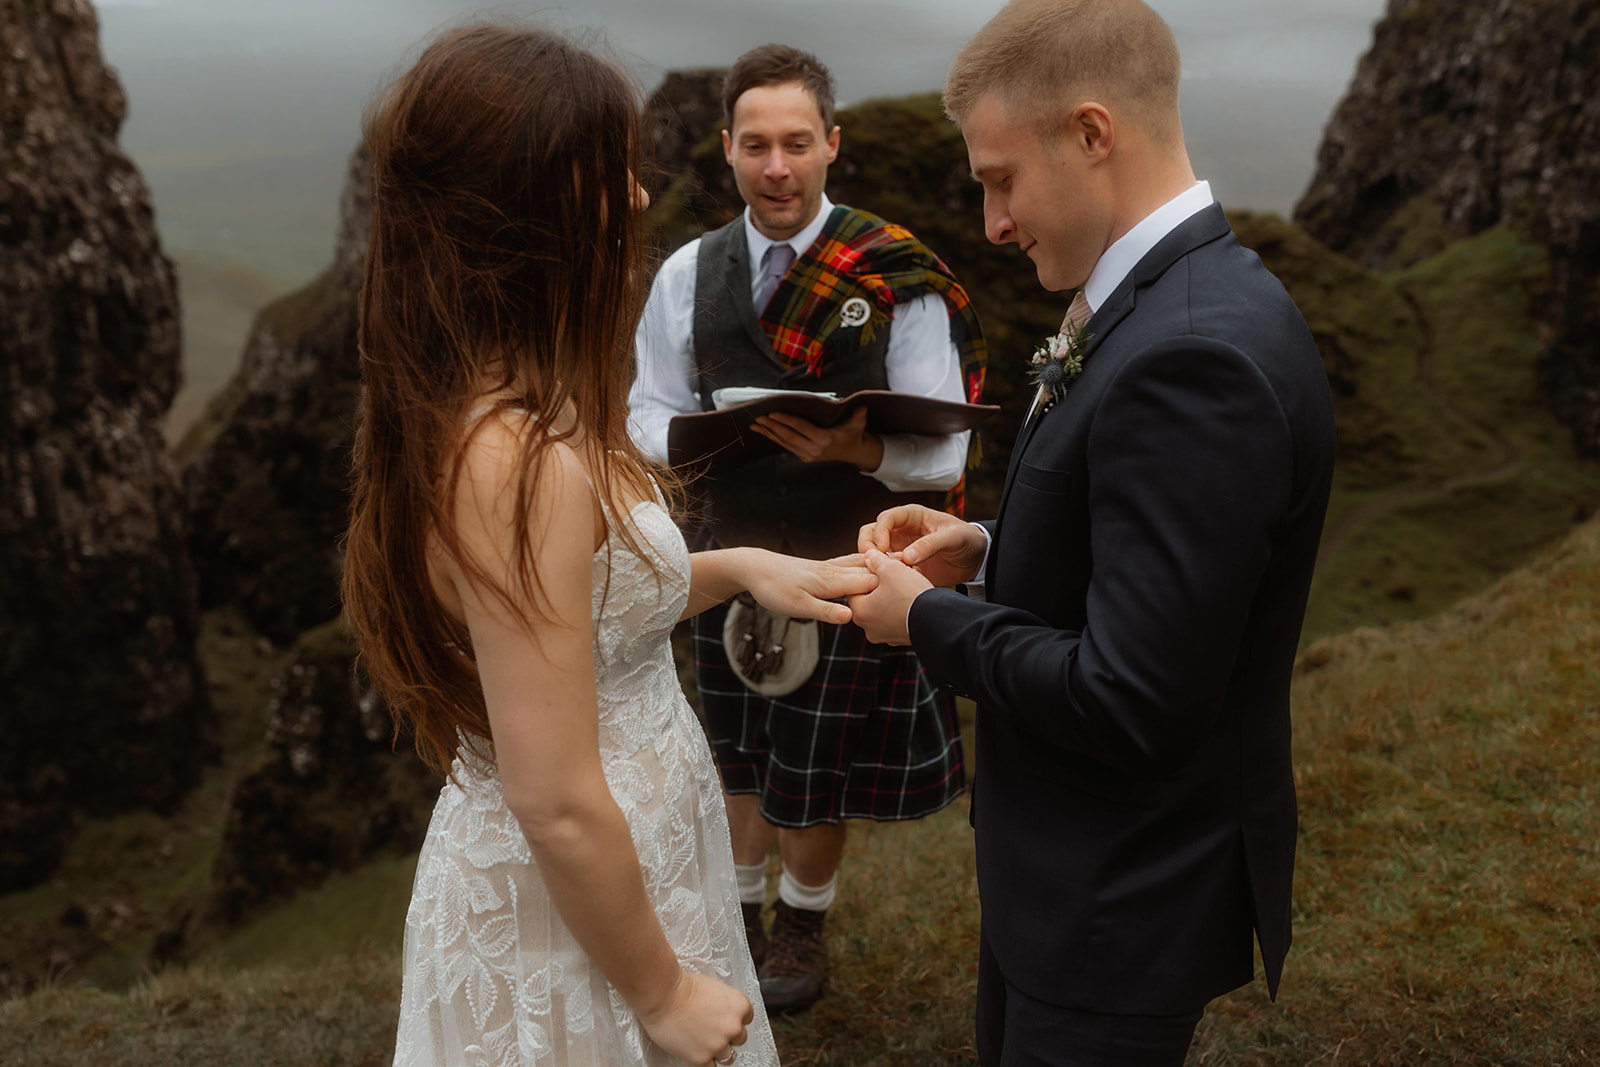 Emma and Matthew shared their vows to each other during their Isle of Skye elopement ceremony